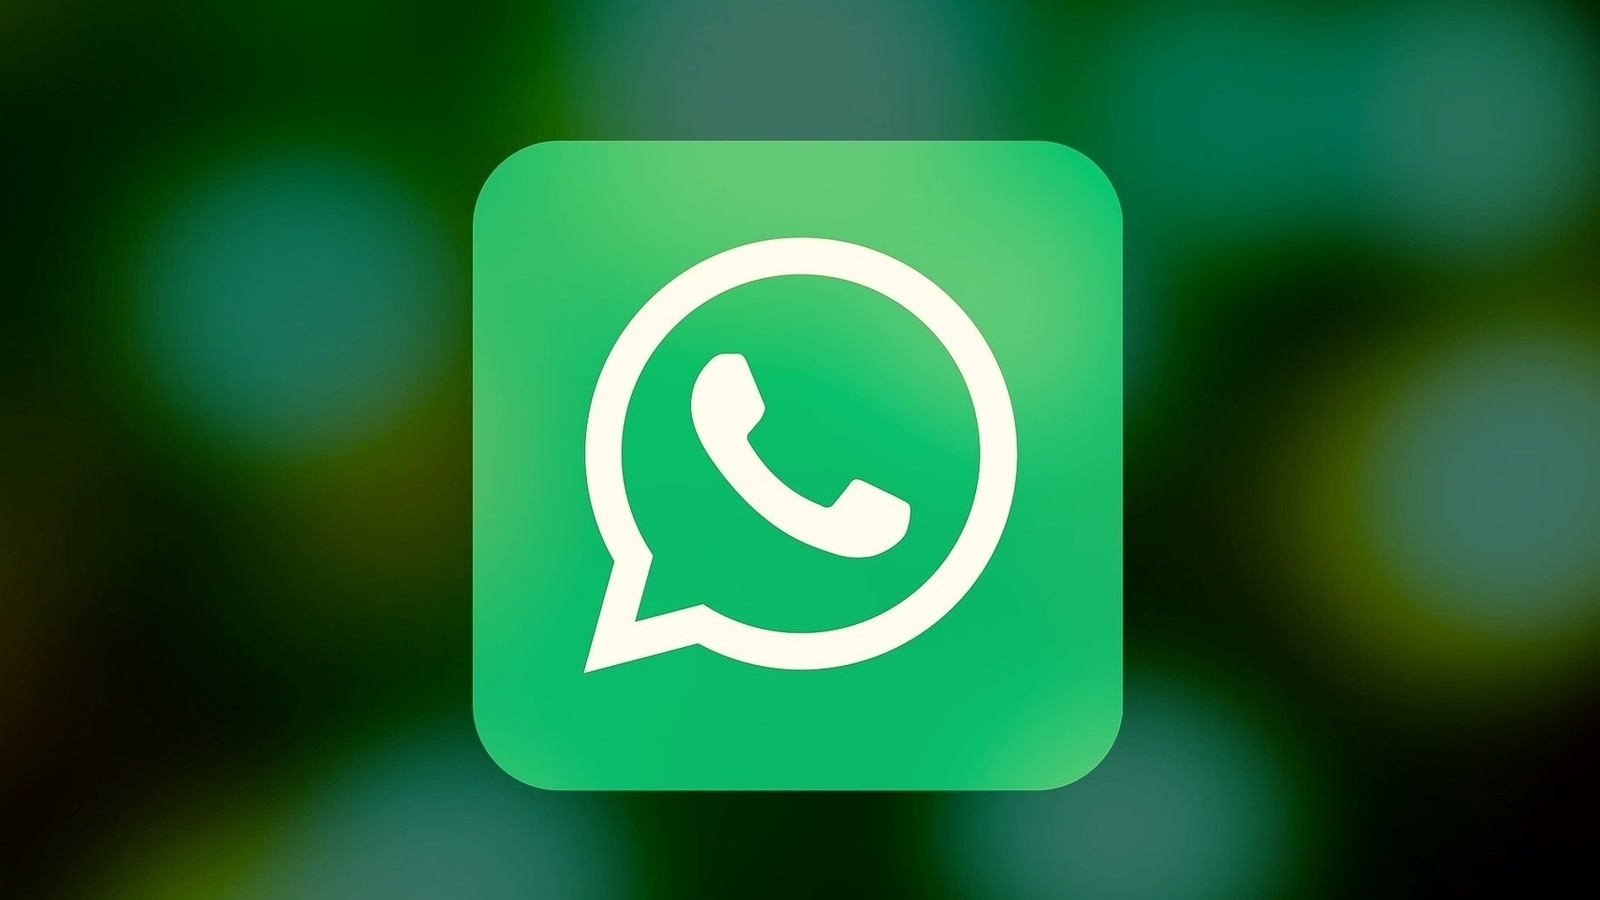 whatsapp on pc without phone download